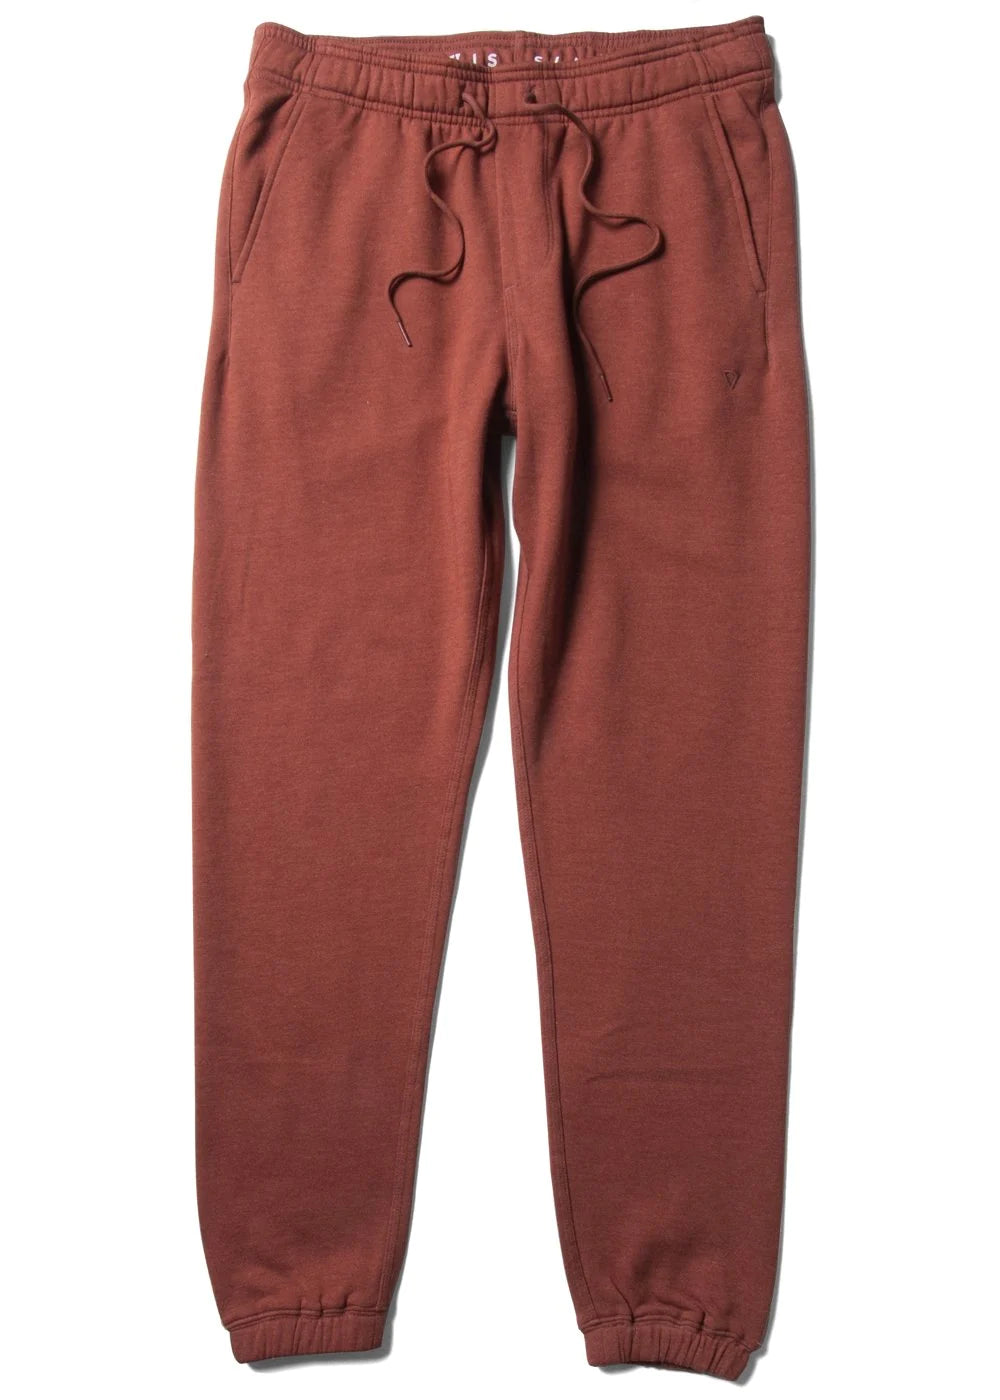 SSEE Sweatpant - Heather Barn Red